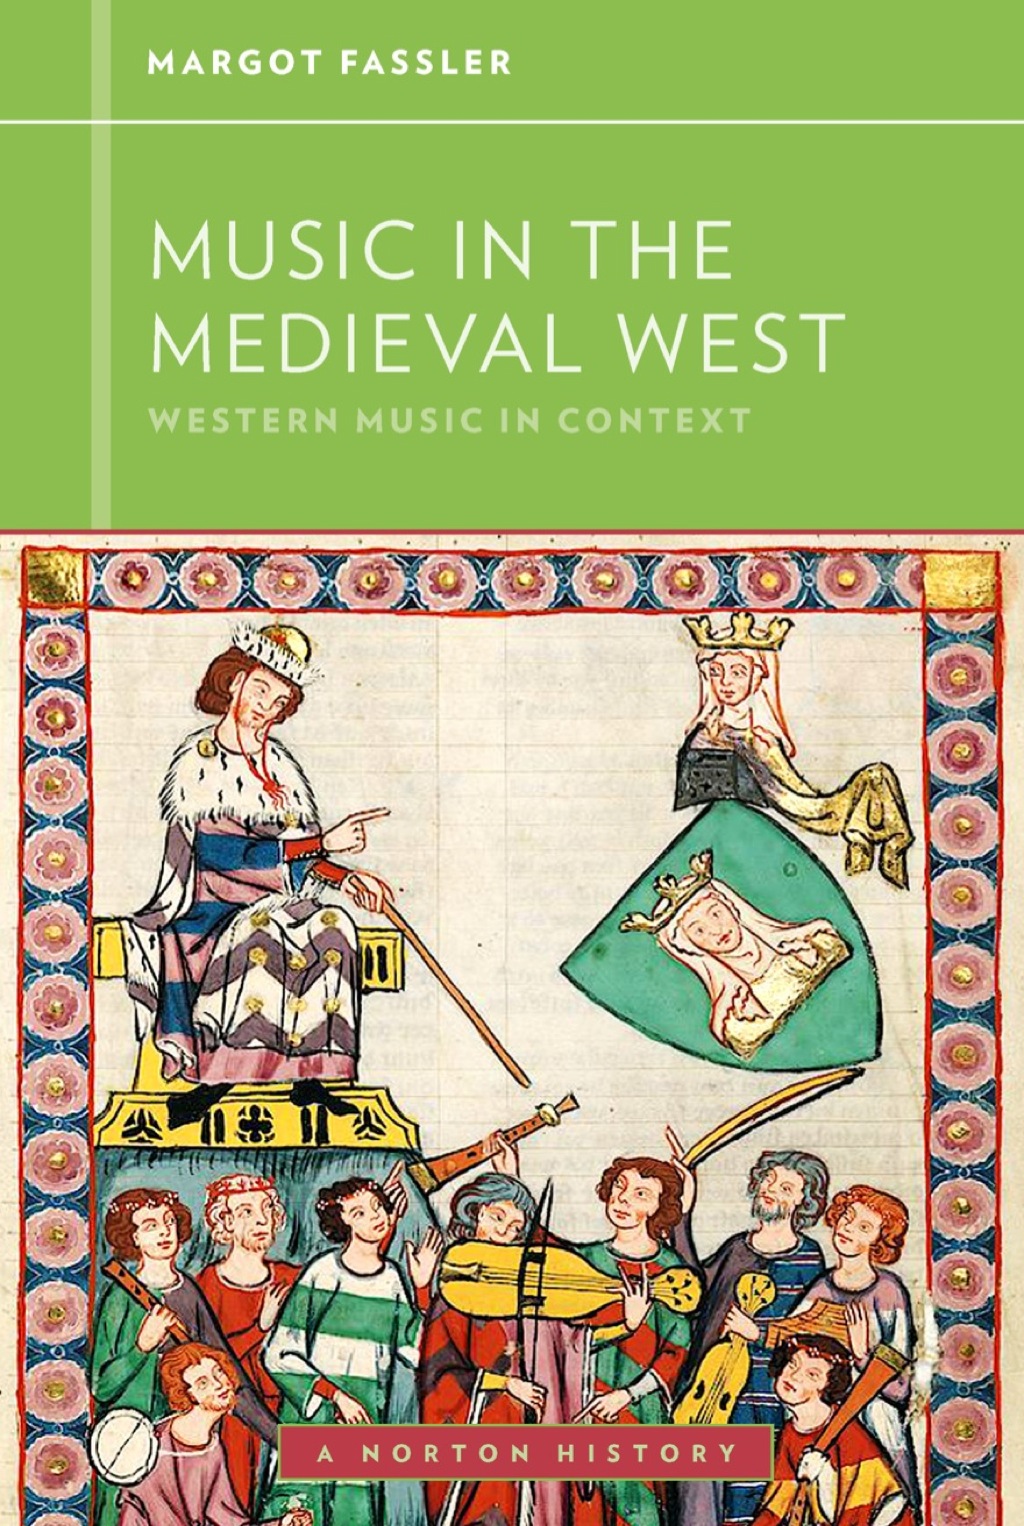 Music in the Medieval West (Western Music in Context: A Norton History) (eBook) - Margot Fassler